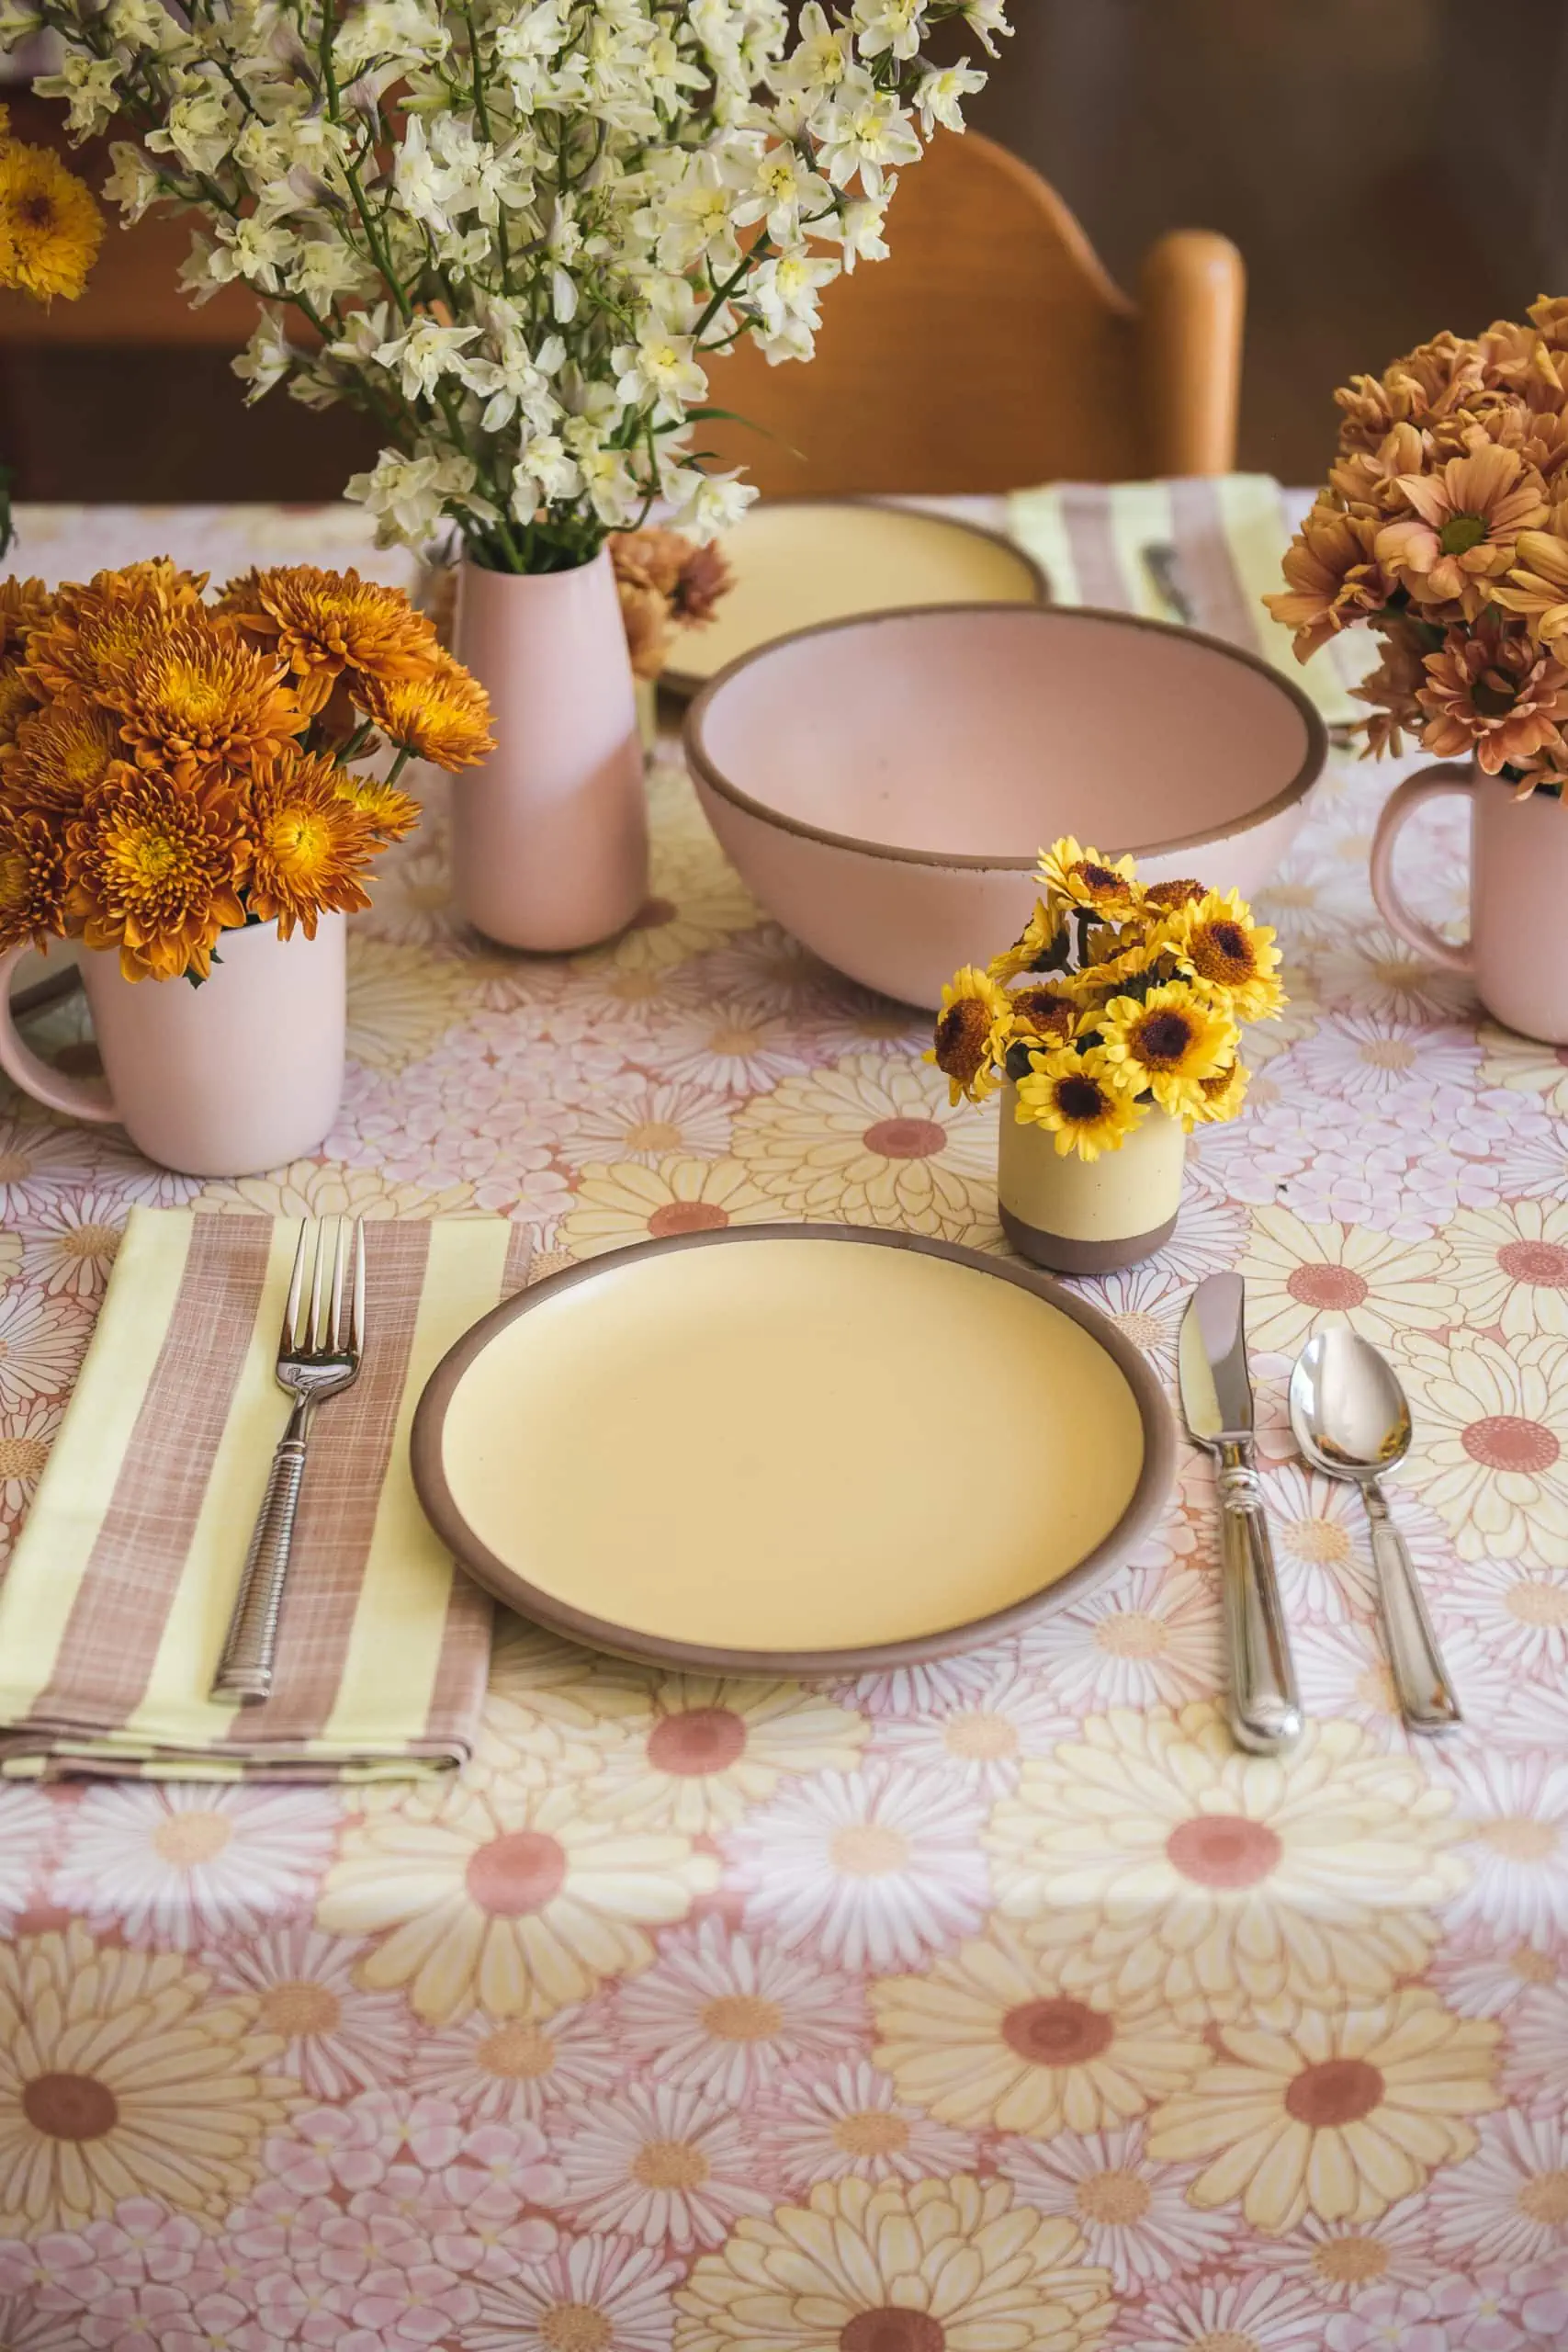 70s vibe brunch with yellow plates and floral tablecloth and fresh flowers